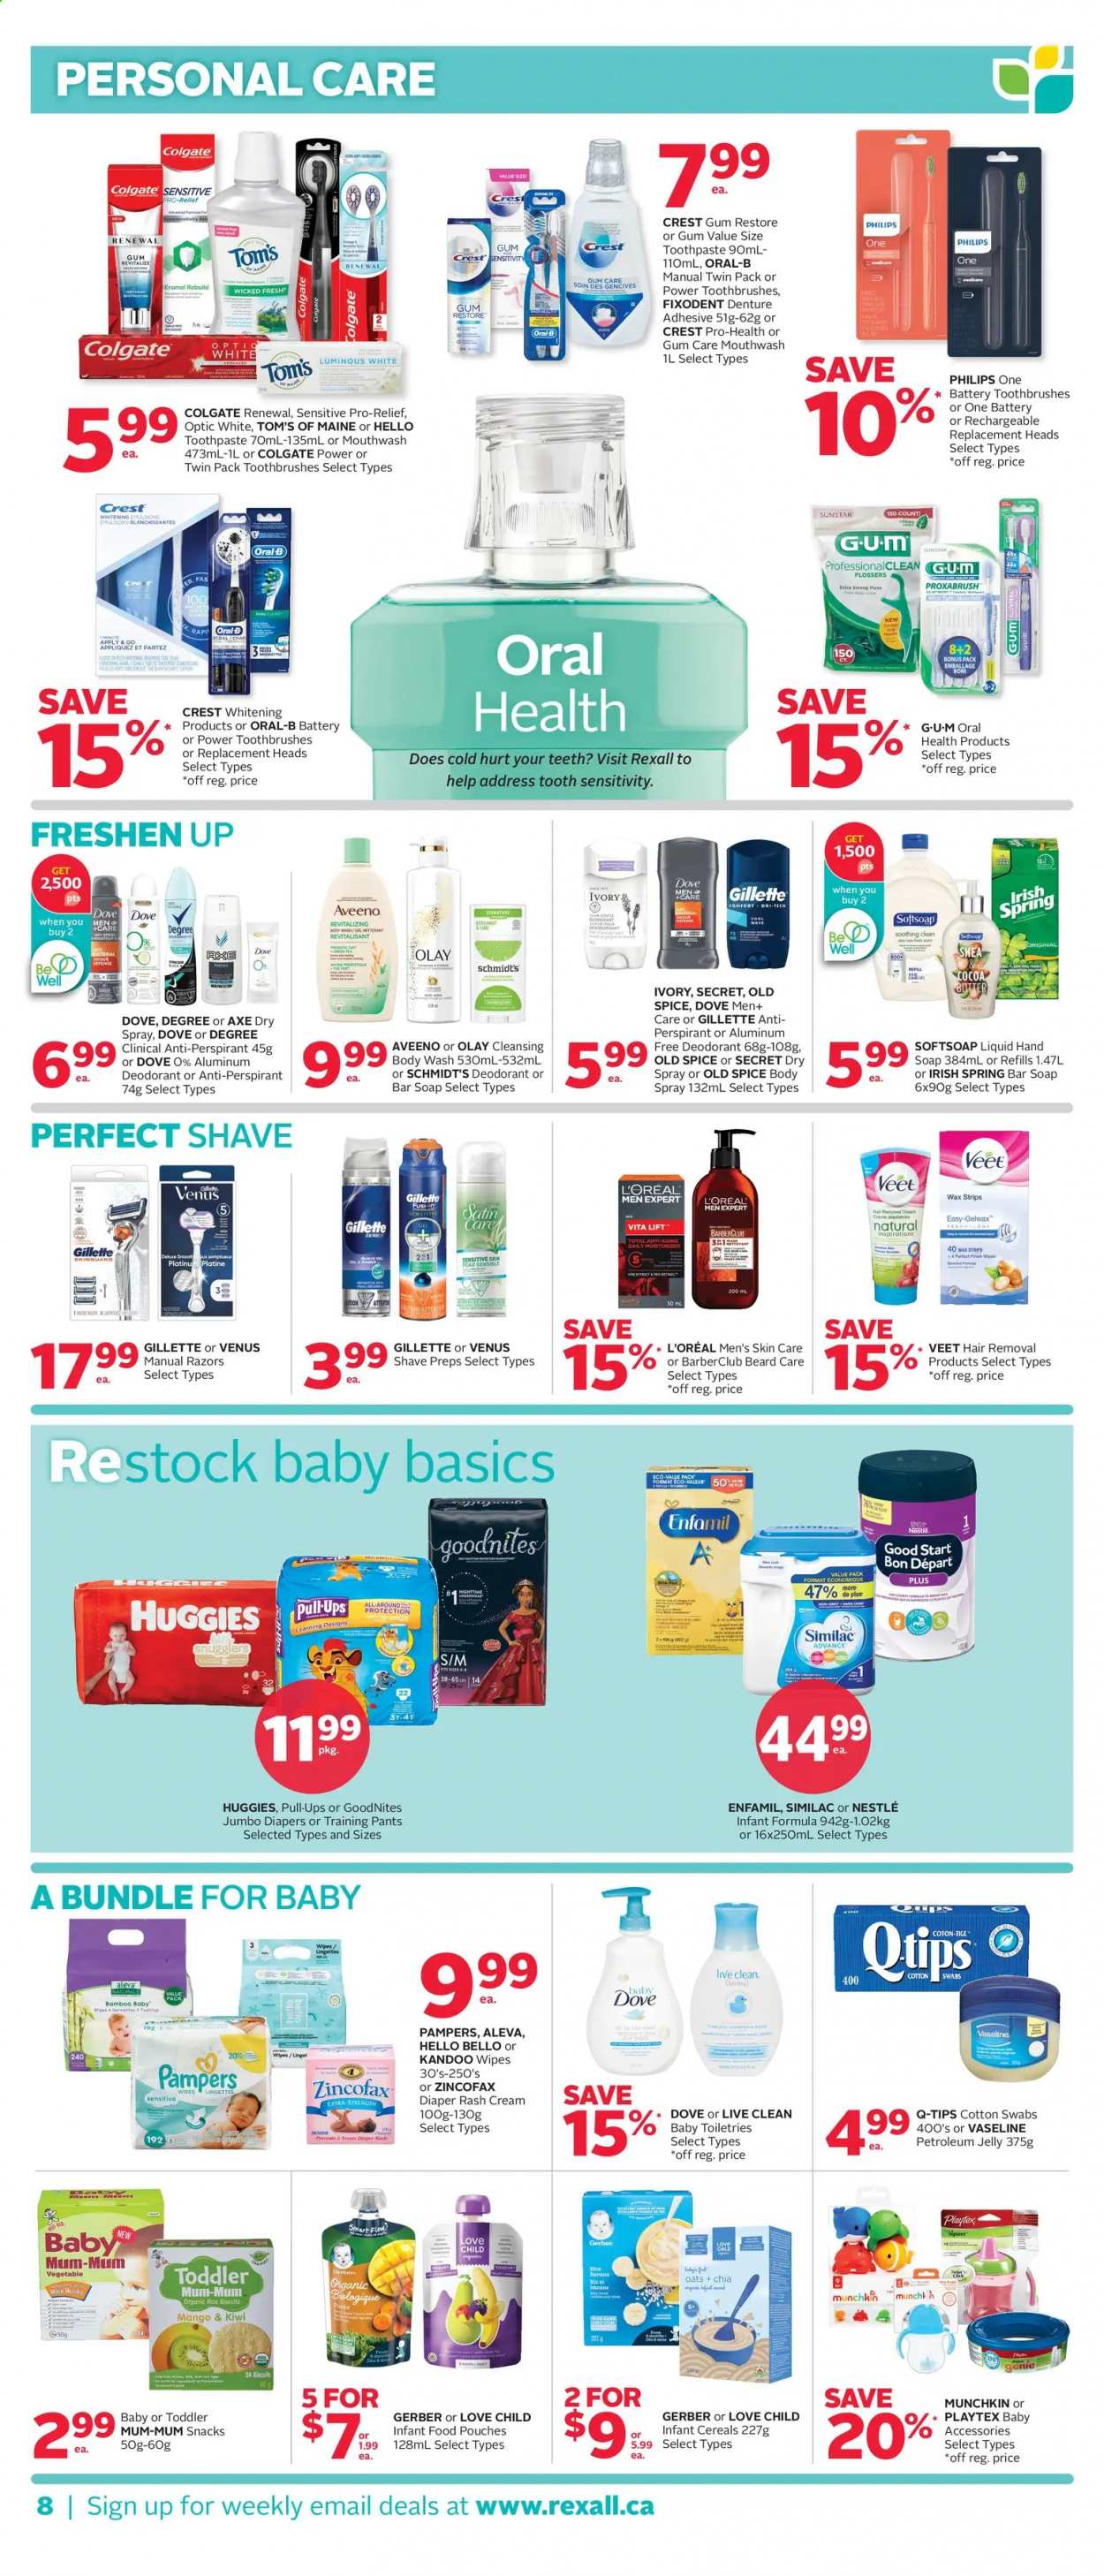 thumbnail - Circulaire Rexall - 16 Avril 2021 - 22 Avril 2021 - Produits soldés - biscuits, Nestlé, Axe, déodorant, Baby Dove, Veet, lingettes, Colgate, Dove, Gillette, Huggies, Old Spice, Oral-b, Pampers, Sonicare. Page 8.